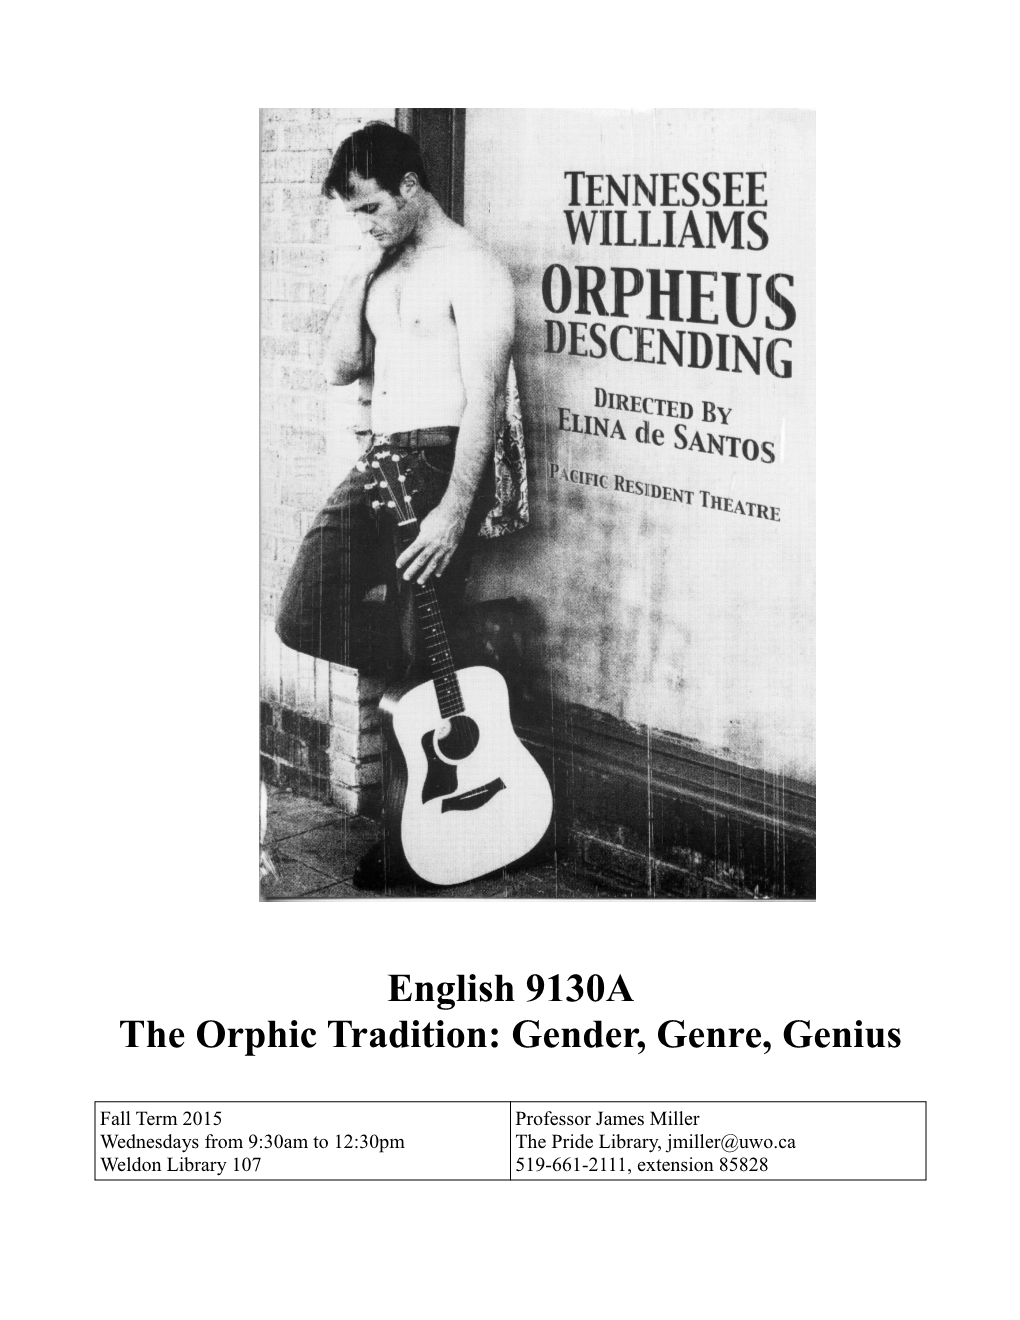 English 9130A the Orphic Tradition: Gender, Genre, Genius